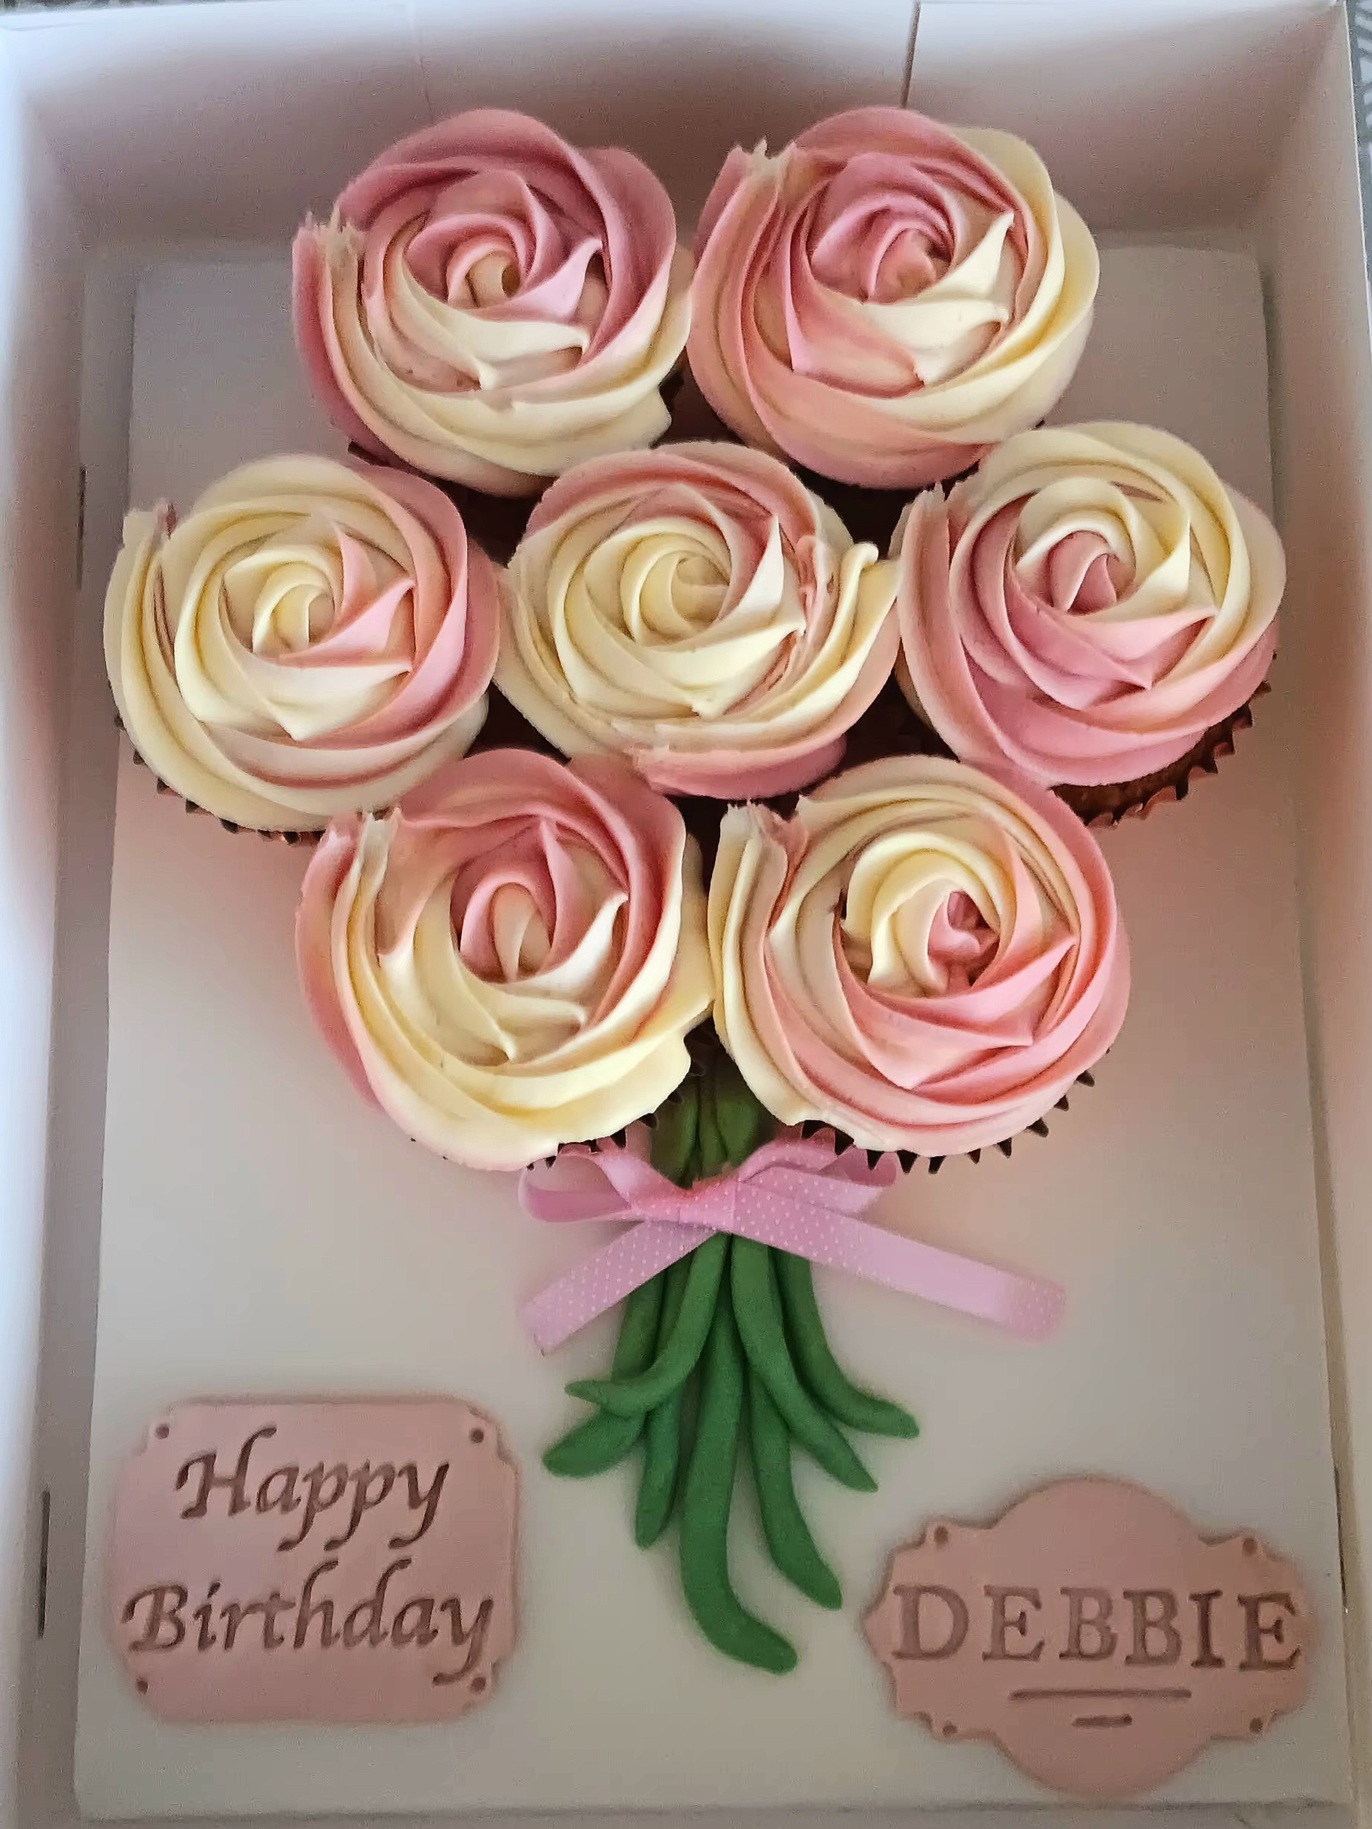 Pink and white rose swirl cupcake bouquet